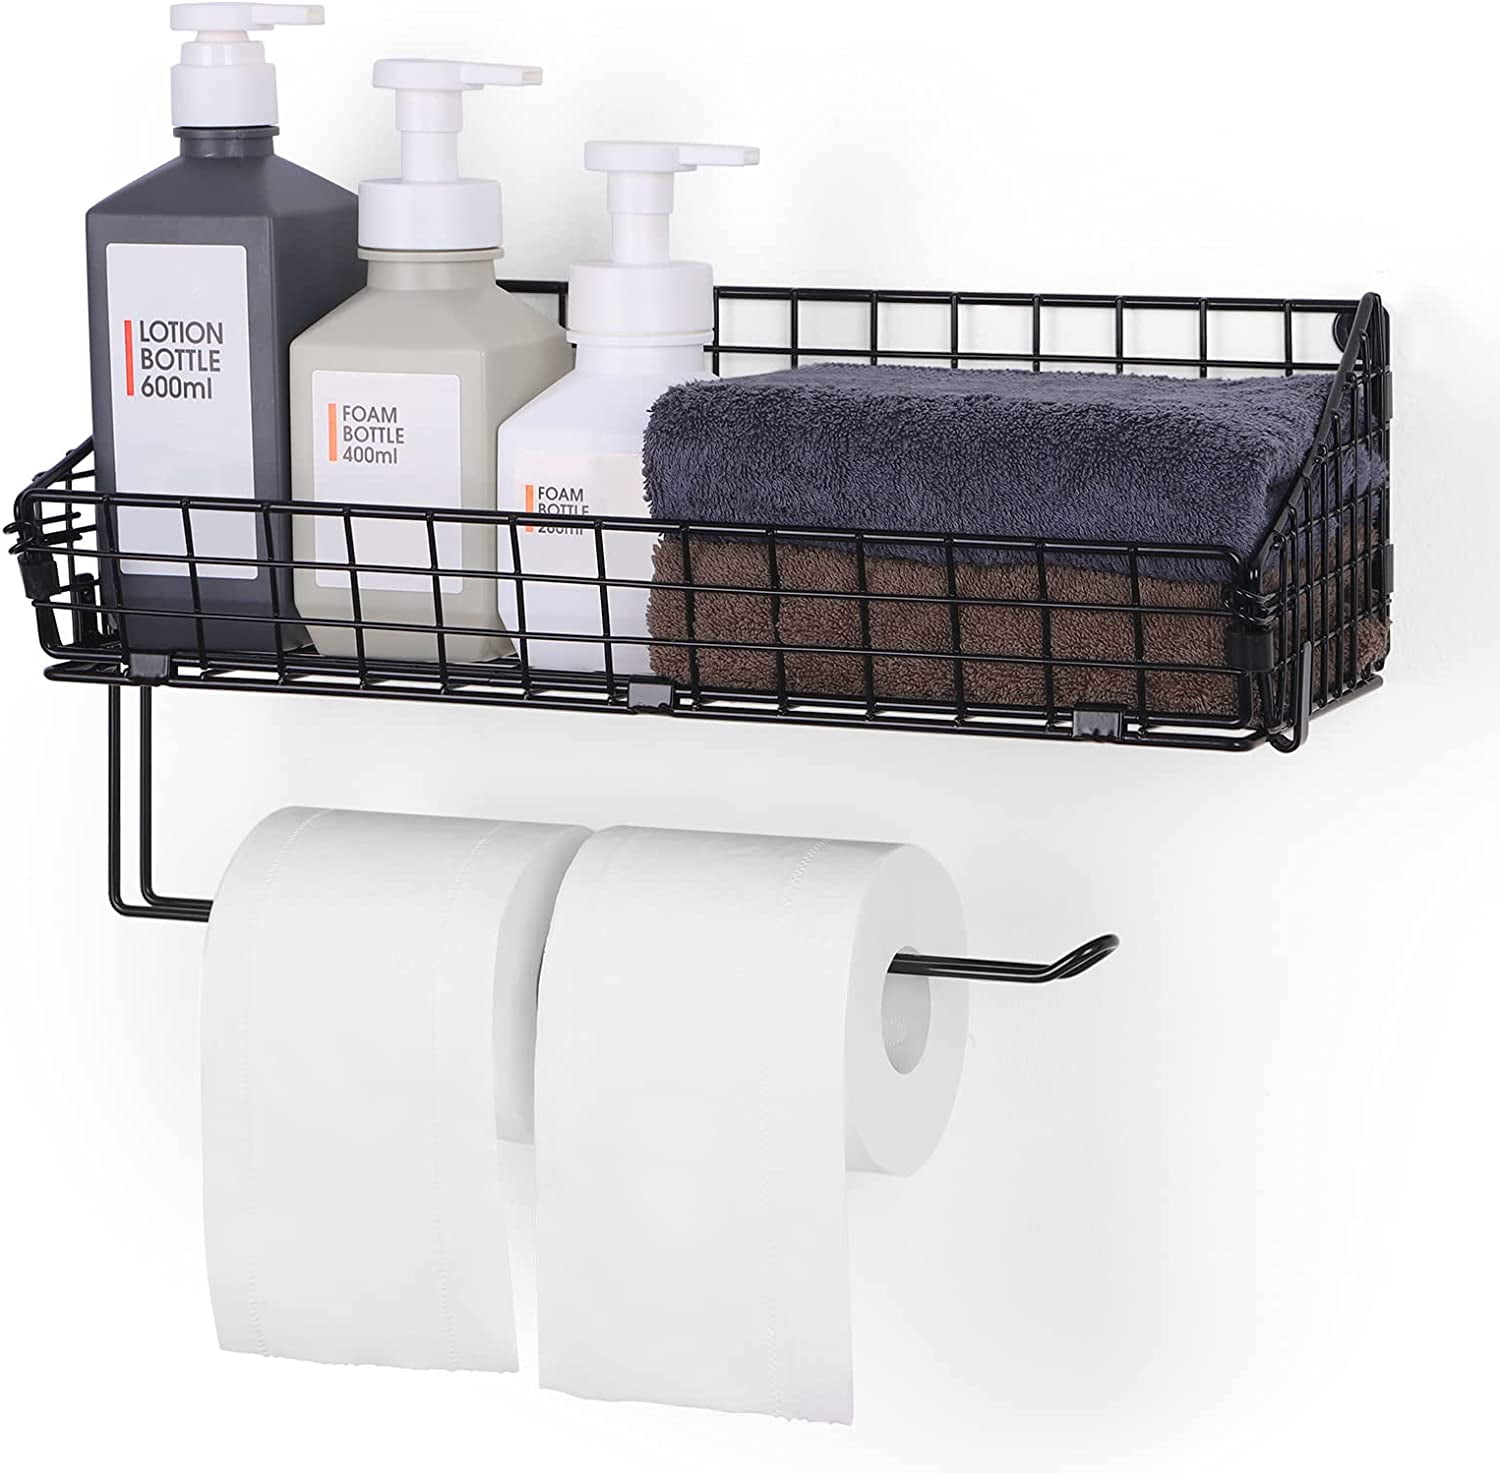 Wall-Mounted Black Paper Towel Holder with Shelf